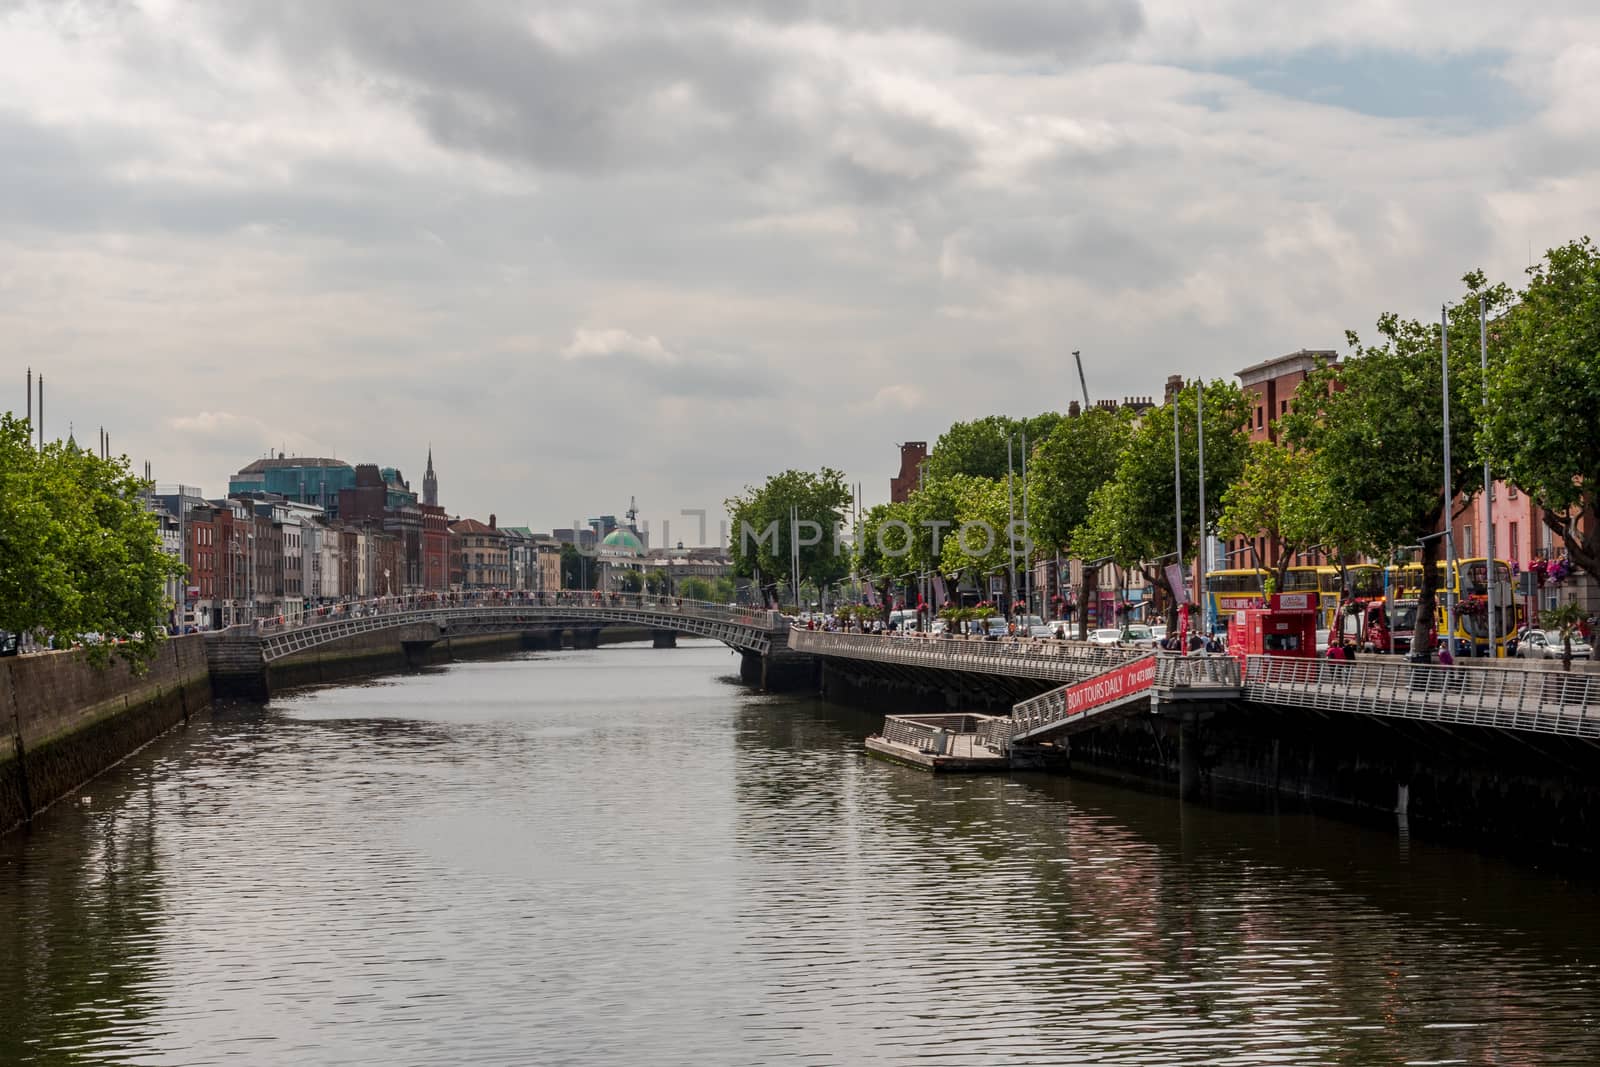 Dublin, Ireland -- July 9, 2018.  The sidewalks and streets on the banks of the River Liffey in Dublin, Ireland are crowded with travelers and tourists.